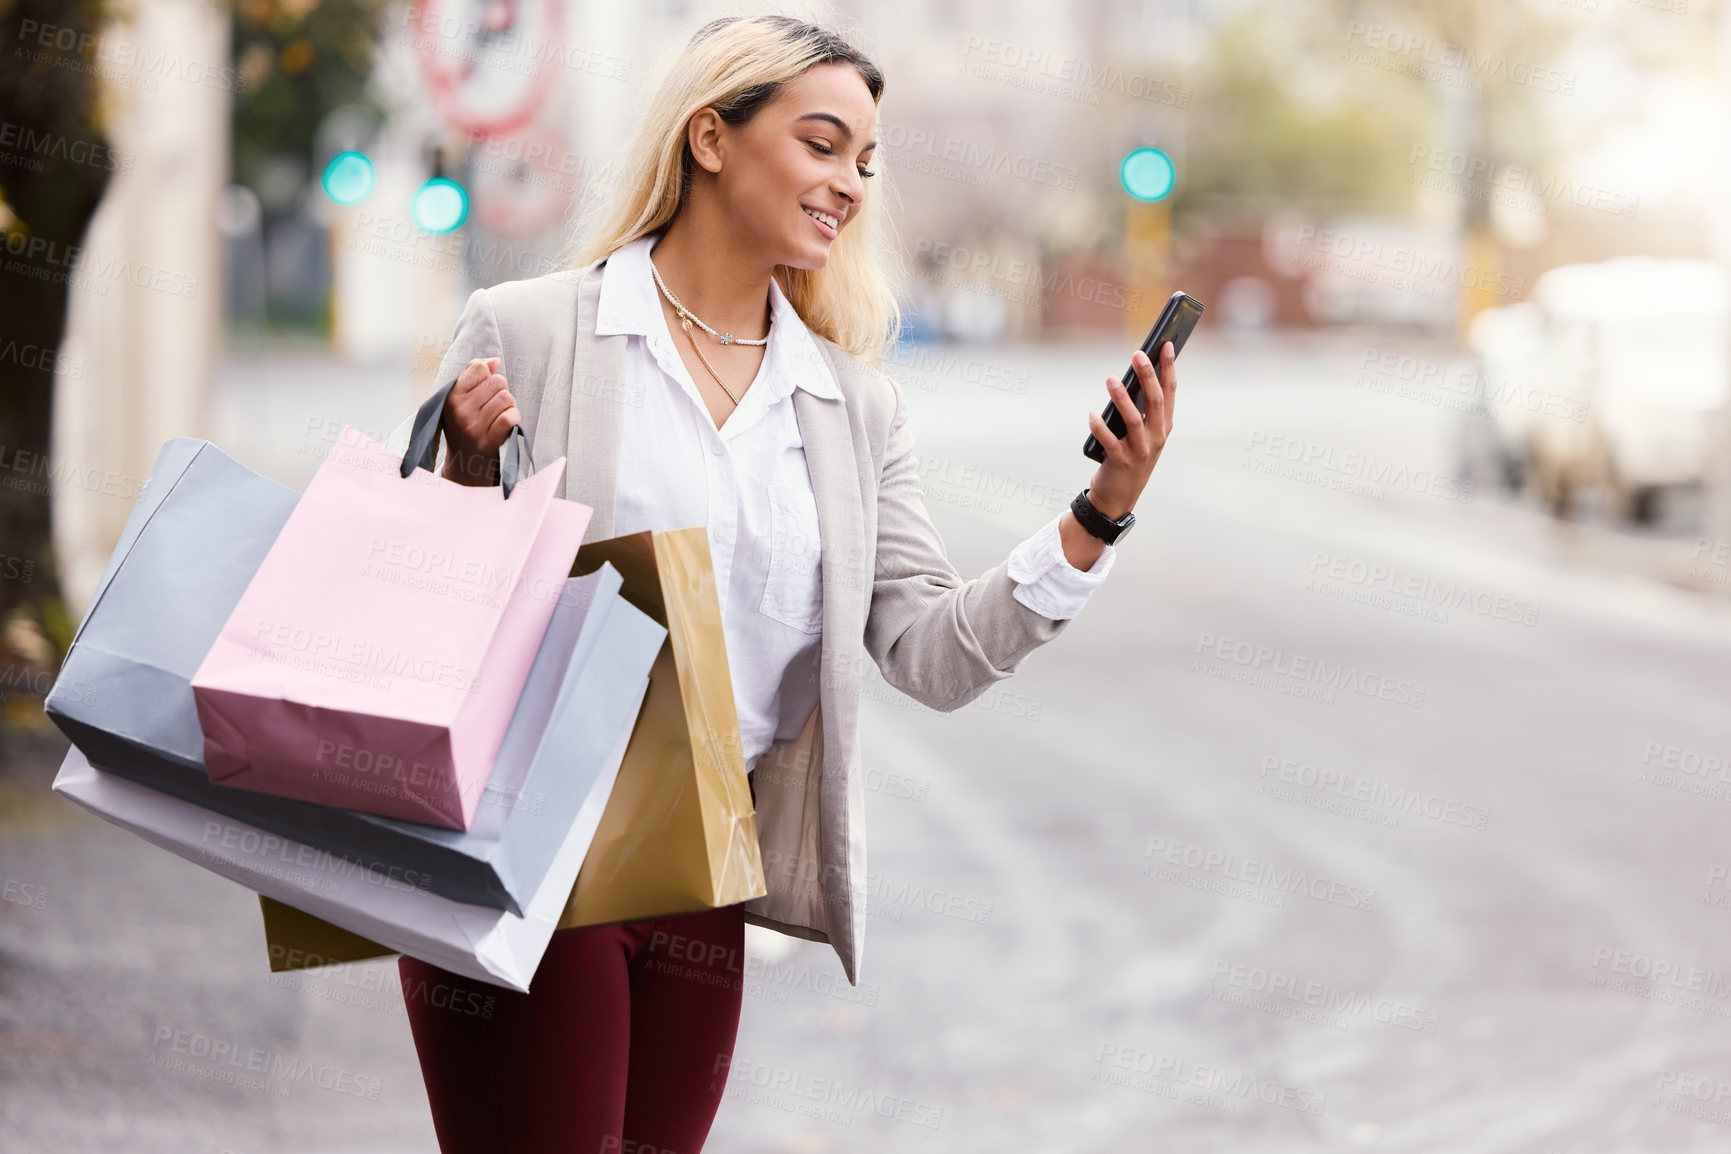 Buy stock photo Shopping bags, phone and woman waiting for taxi in city for sale notification, search bargain or internet deal. Fashion, retail and customer travel with mobile for luxury, online discount or service